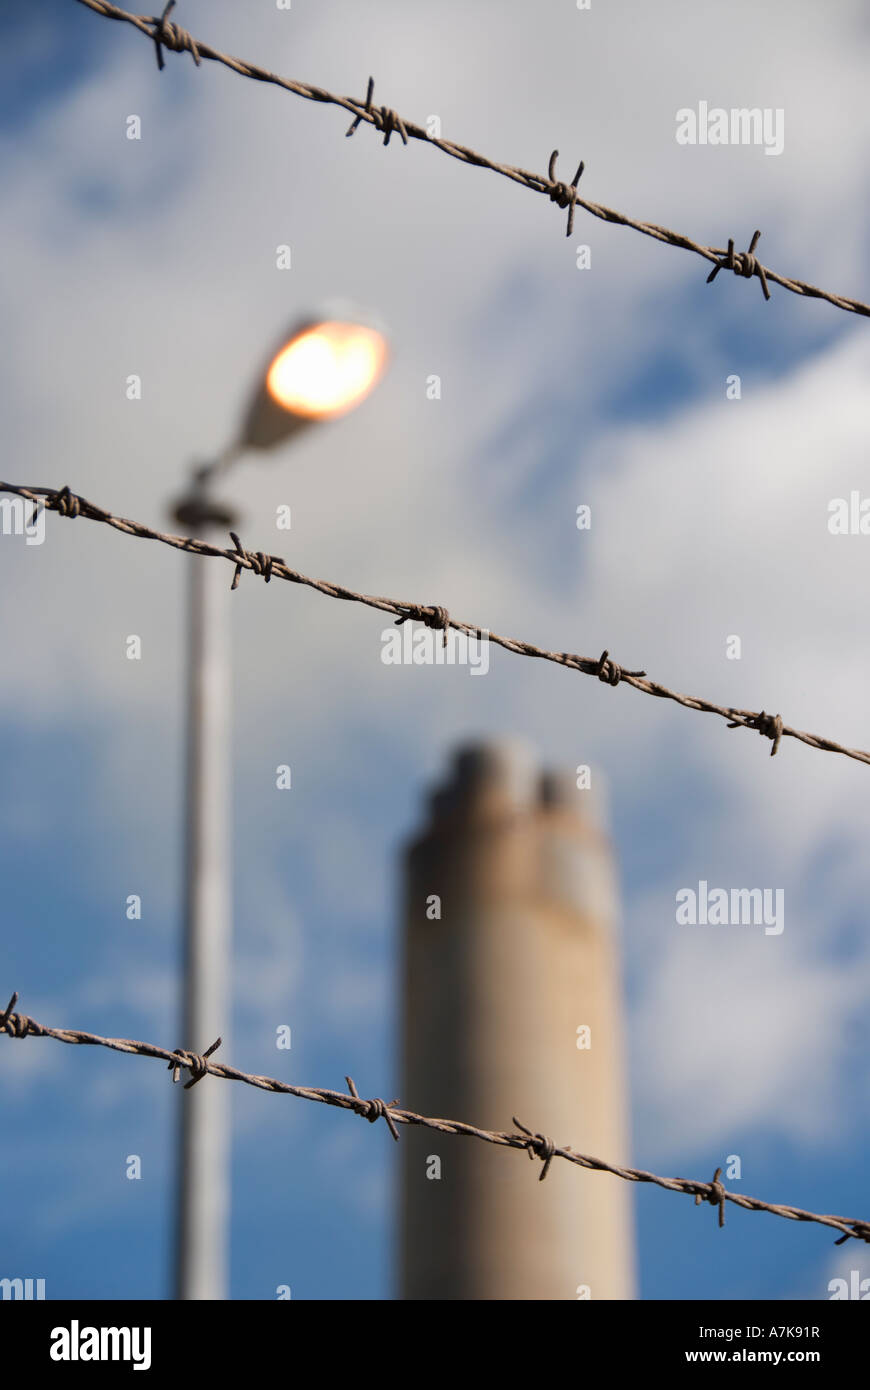 A power  station chimney with smoke shot through a barbed wire security fence. also included is a street light left on. Stock Photo